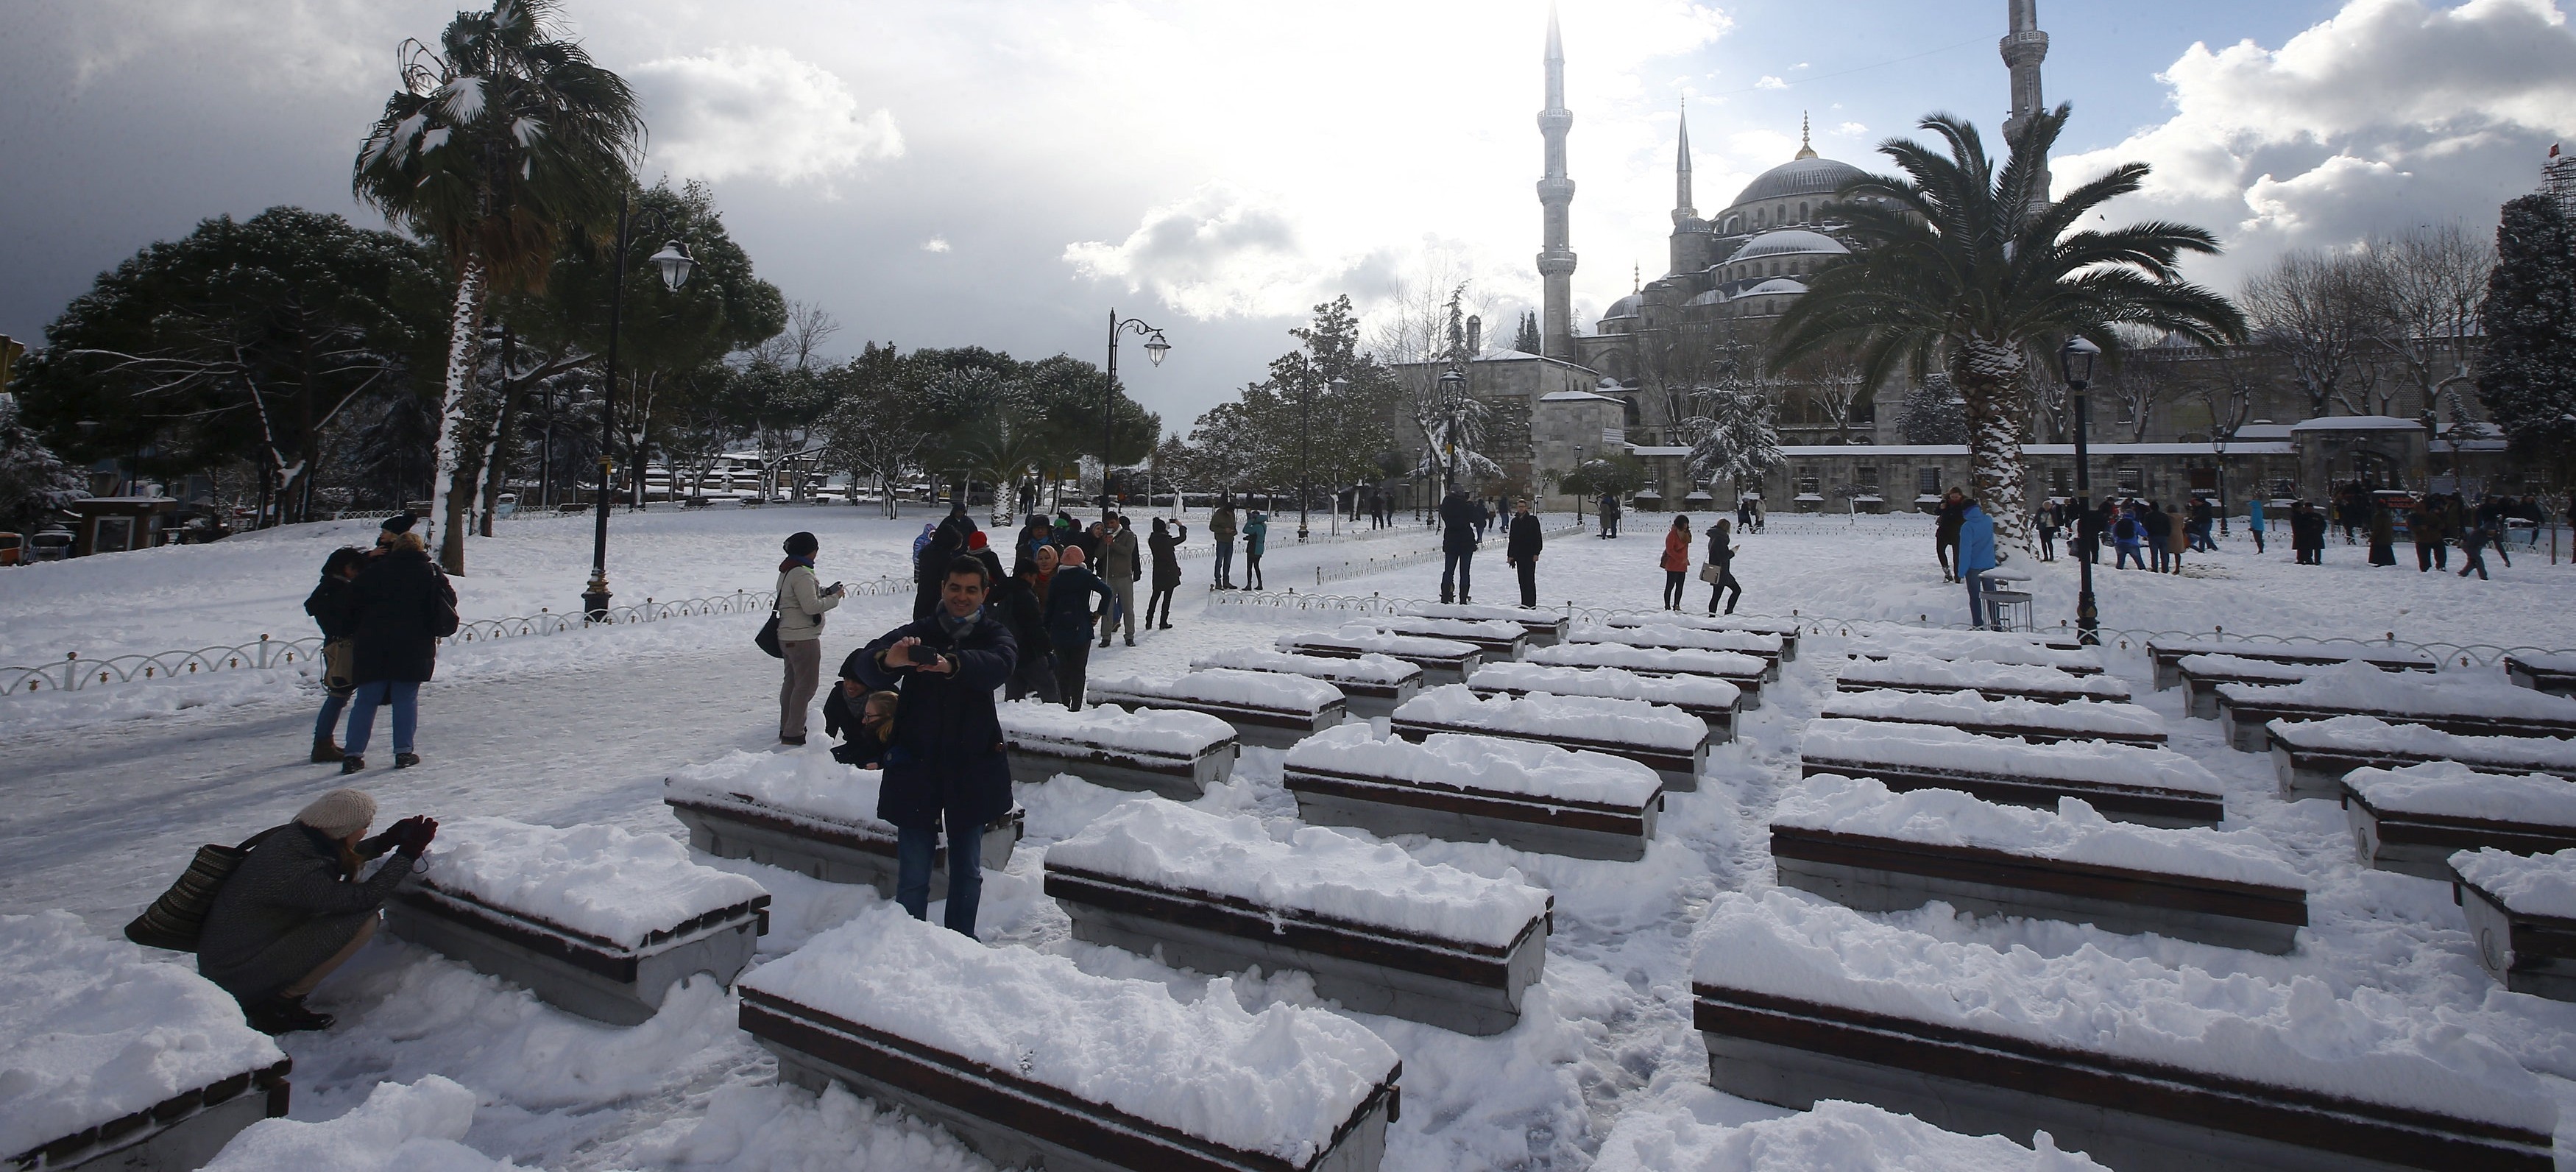 Tourists take a photo on the snow-covered Sultanahmet Square in the historic old town of Istanbul, Turkey,  December 31, 2015.  REUTERS/Osman Orsal - RTX20MLP